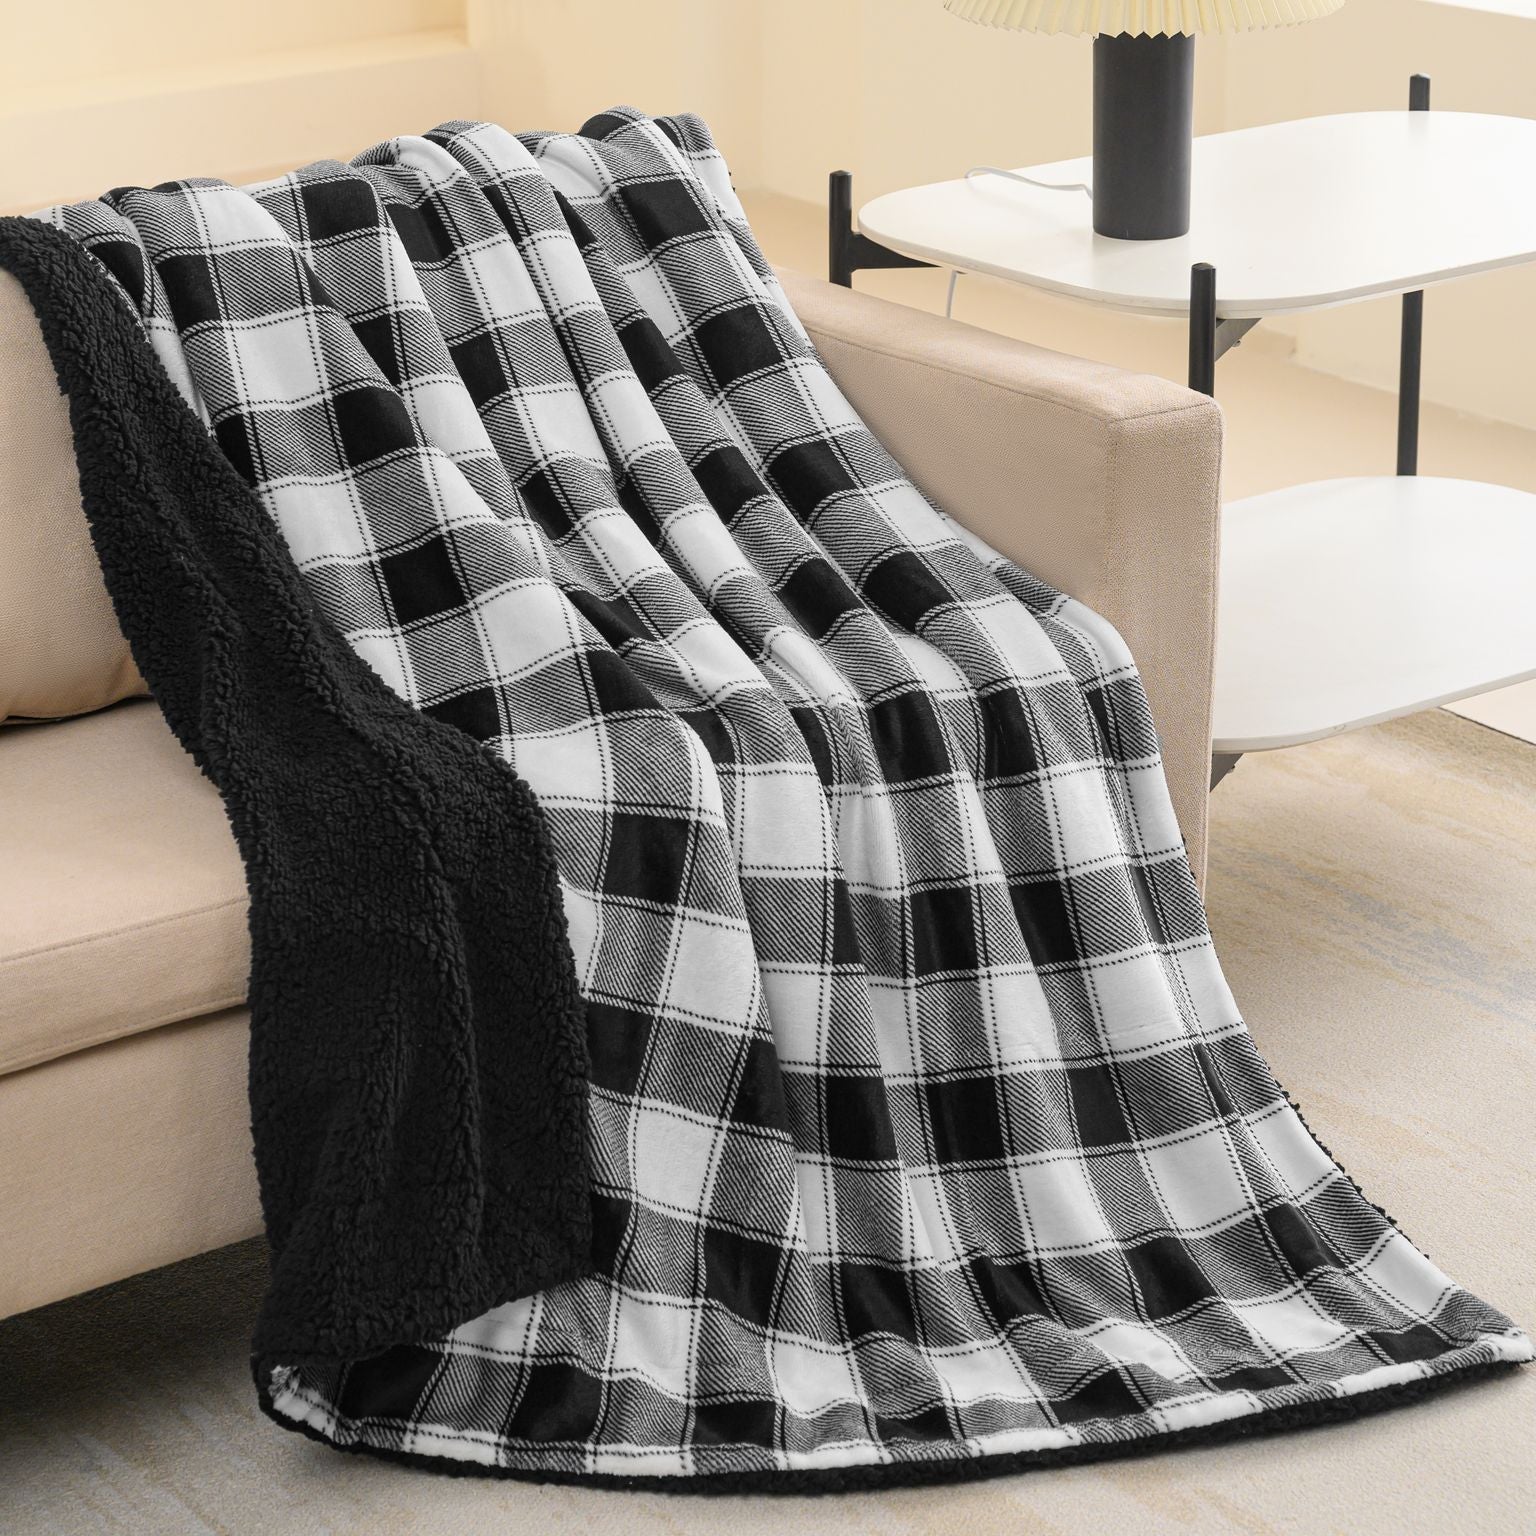 Printed Velvet to Solid Sherpa Throw Blanket 50 x 60 inches Lux Buffalo Check